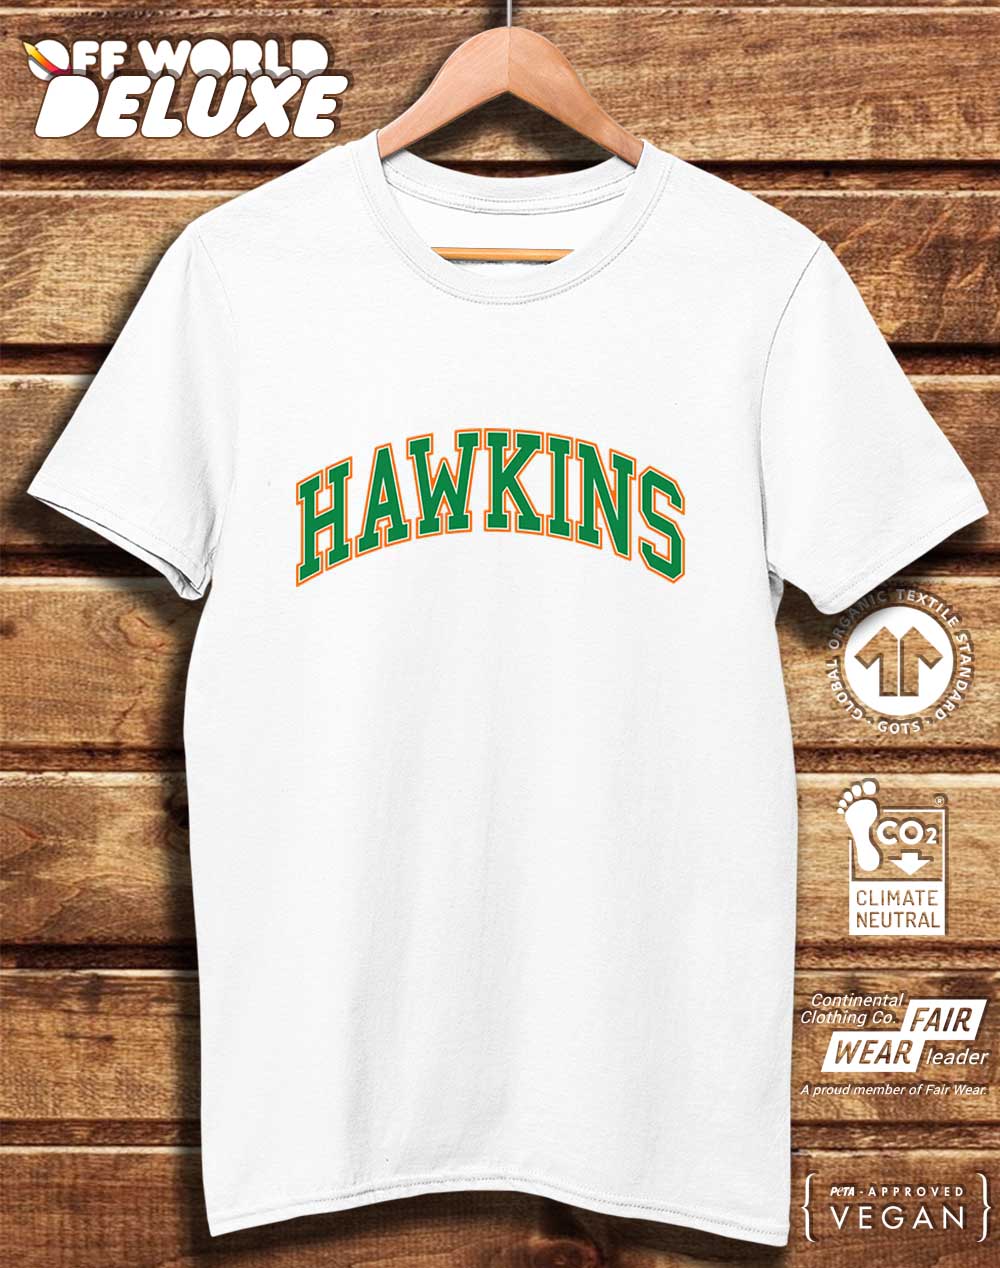 DELUXE Hawkins High Arched Logo Organic Cotton T-Shirt